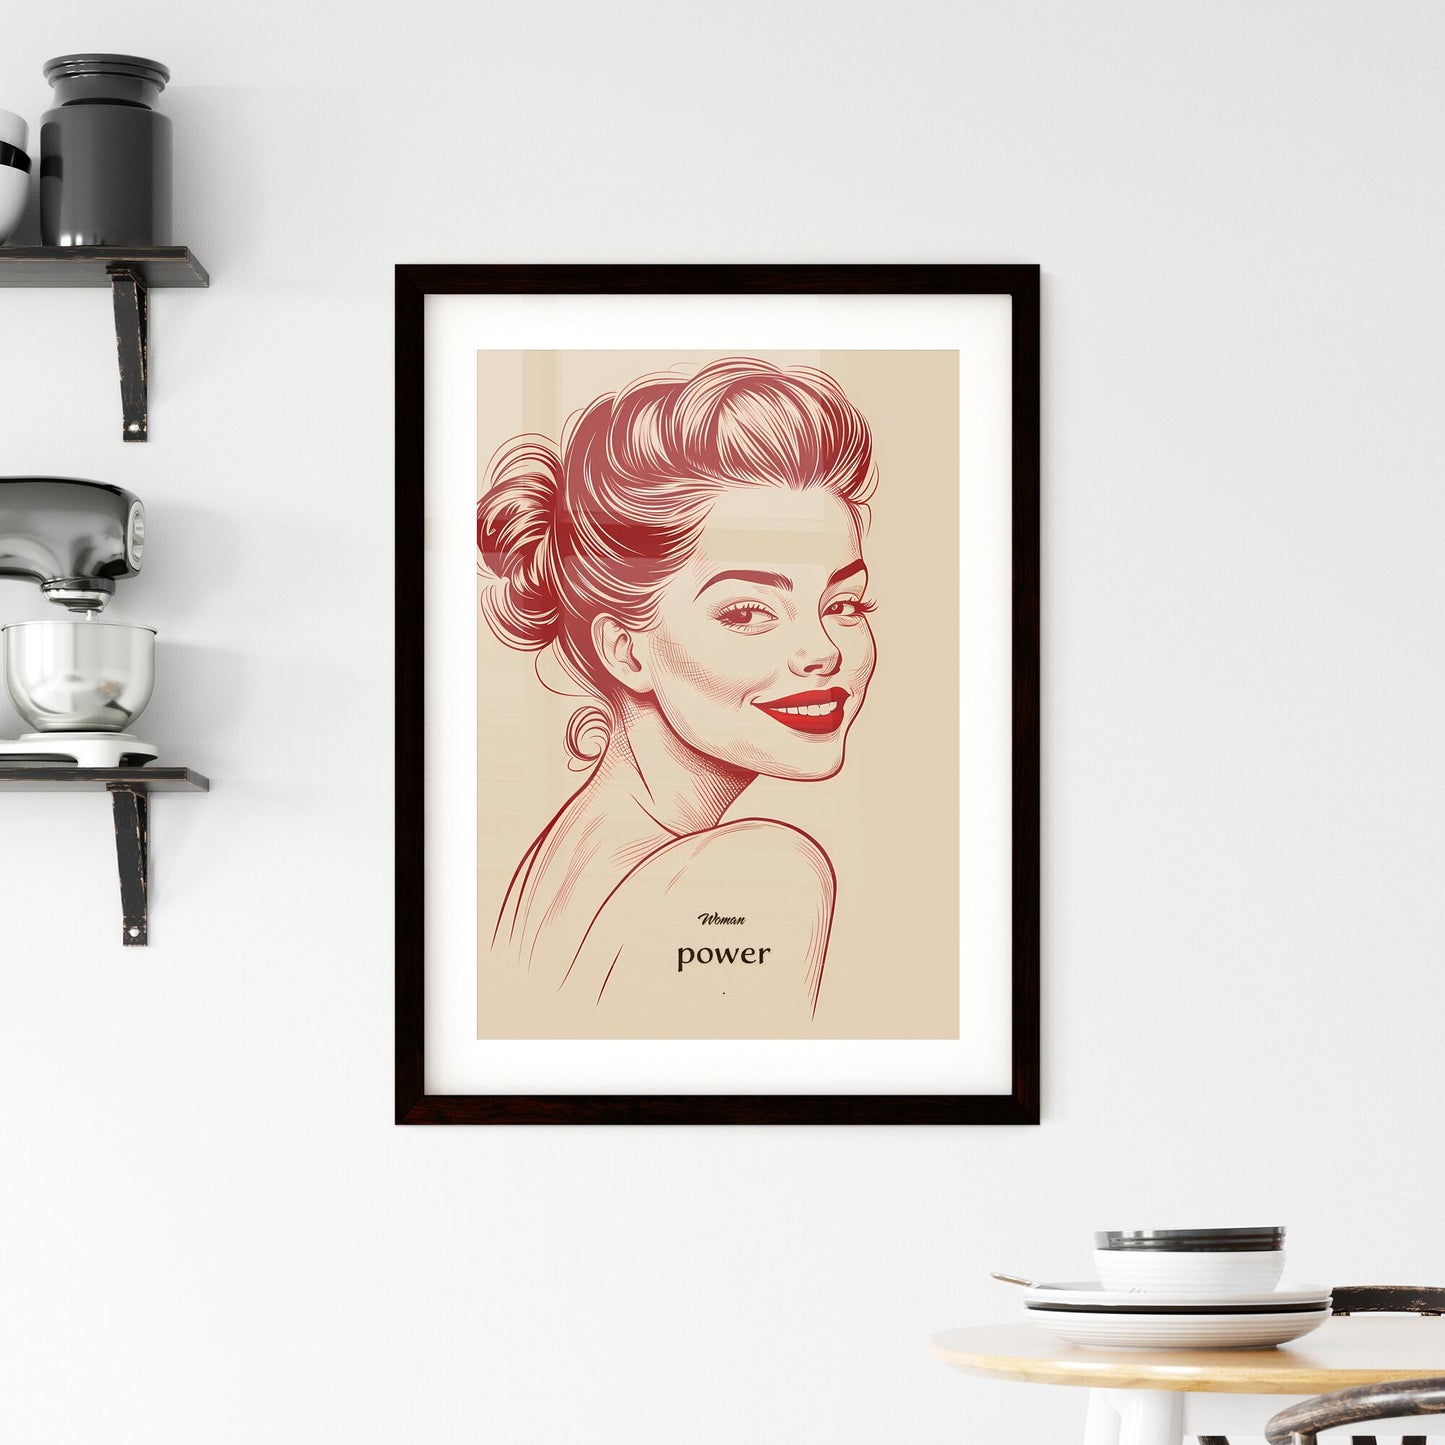 Woman, power, A Poster of a woman with a bun Default Title